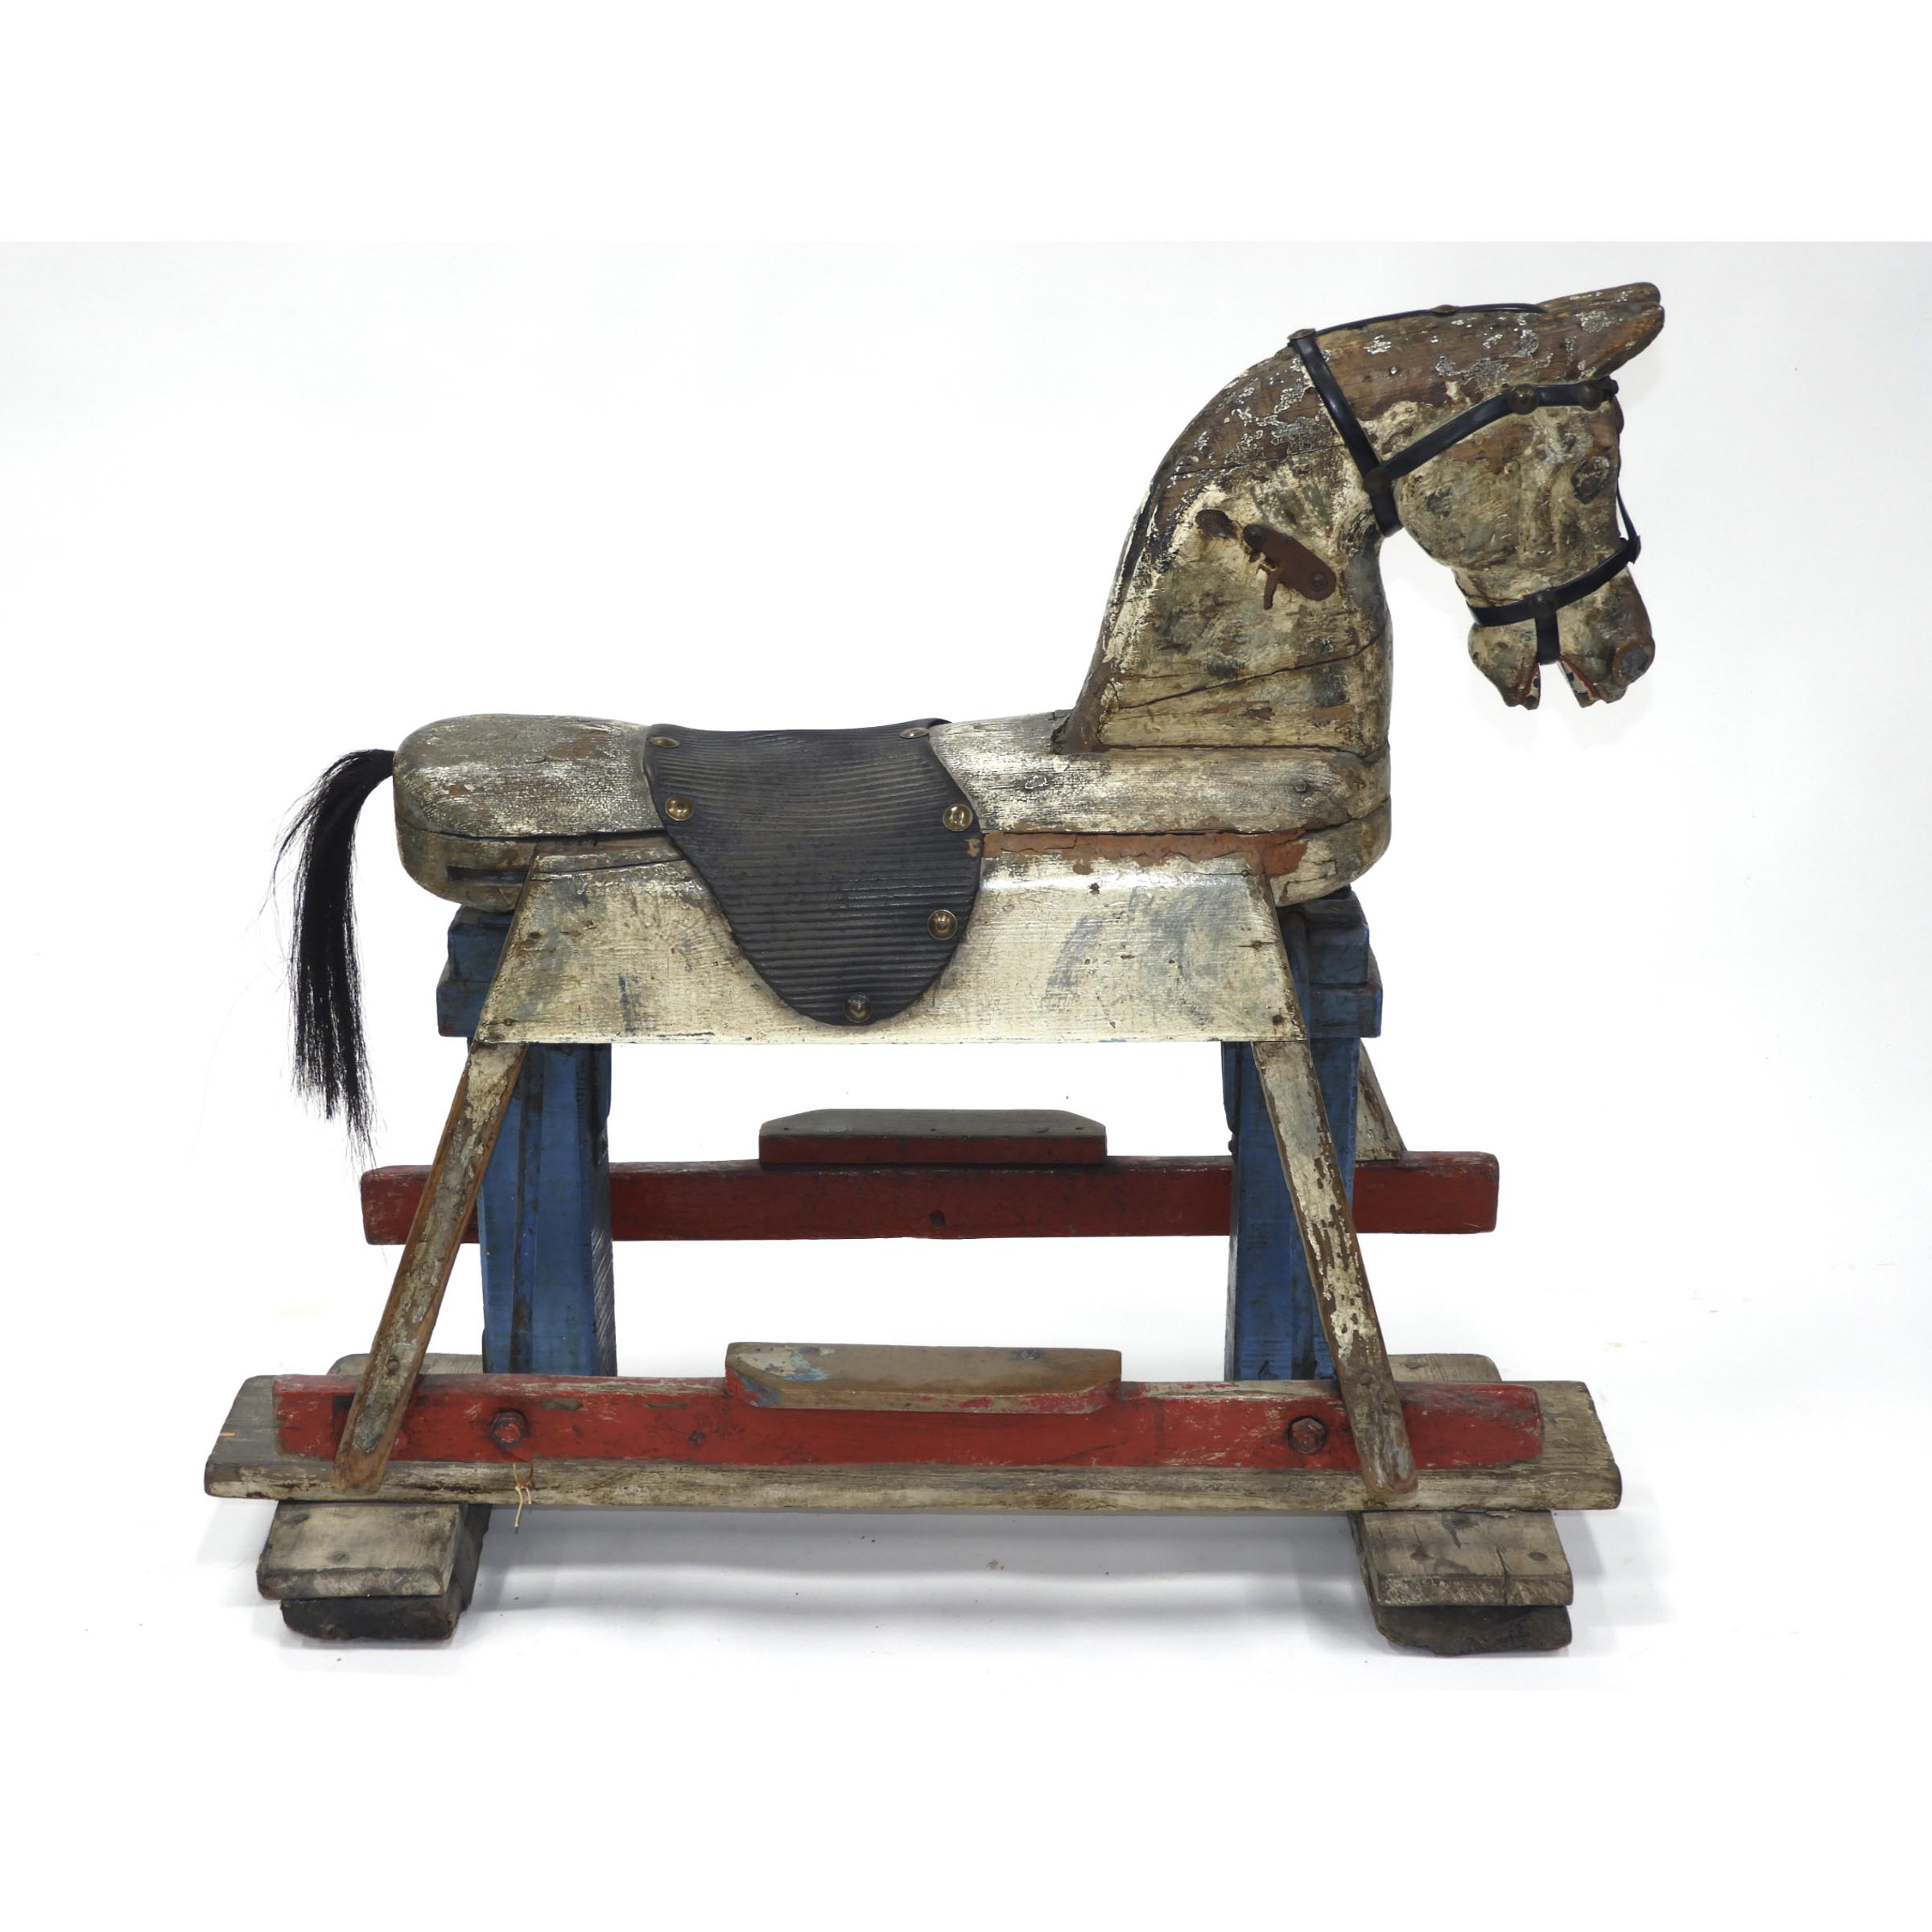 Carved and Polychromed Wood Toy Platform Rocking Horse, 19th century